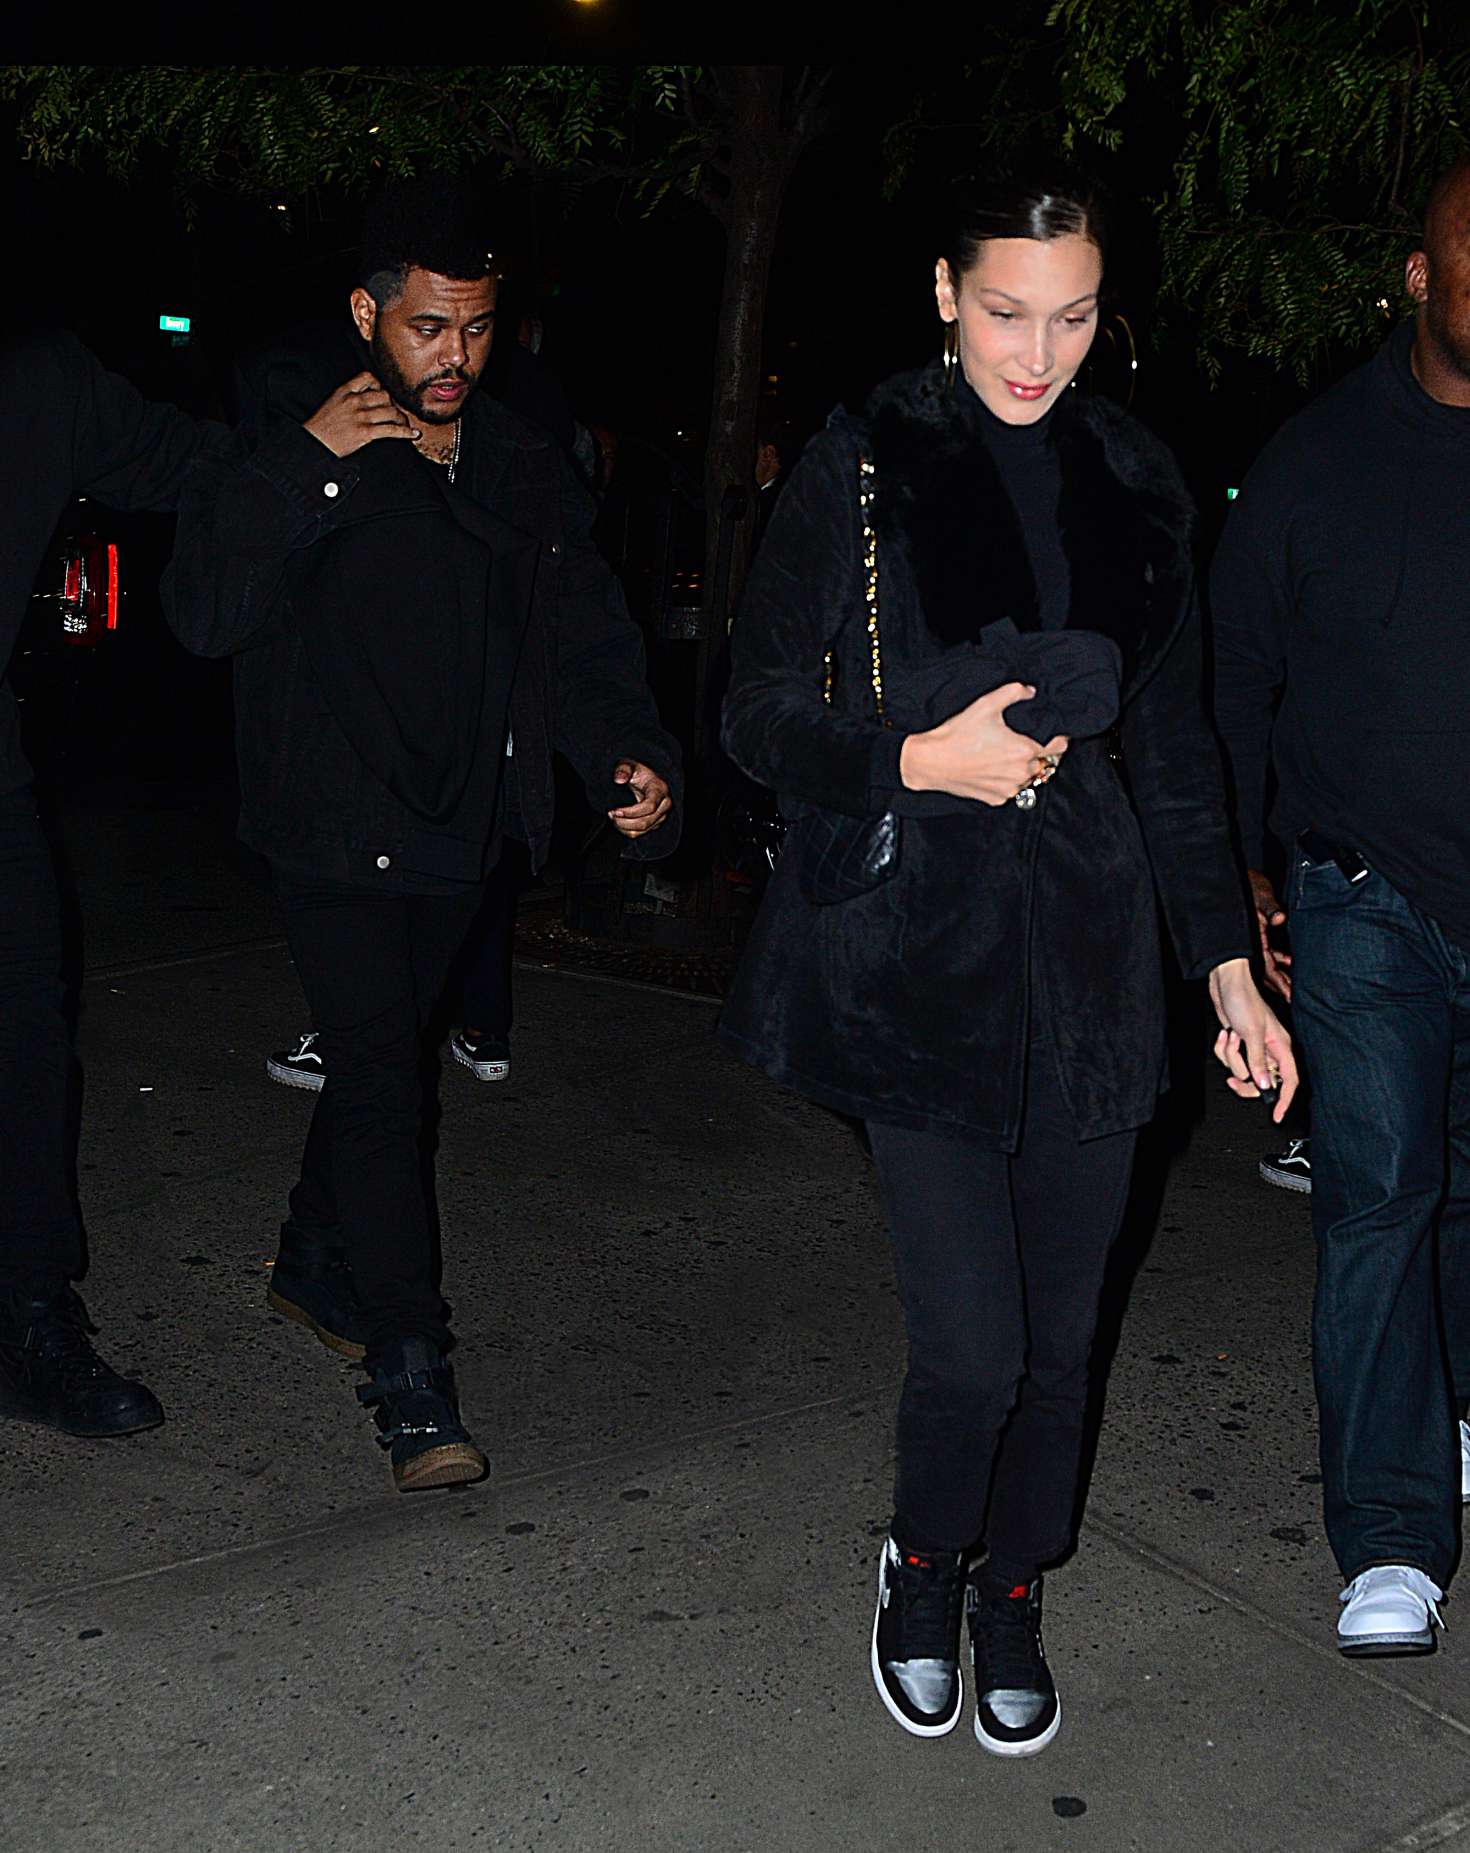 Bella Hadid 2018 : Bella Hadid and The Weeknd: Night out in New York City -04